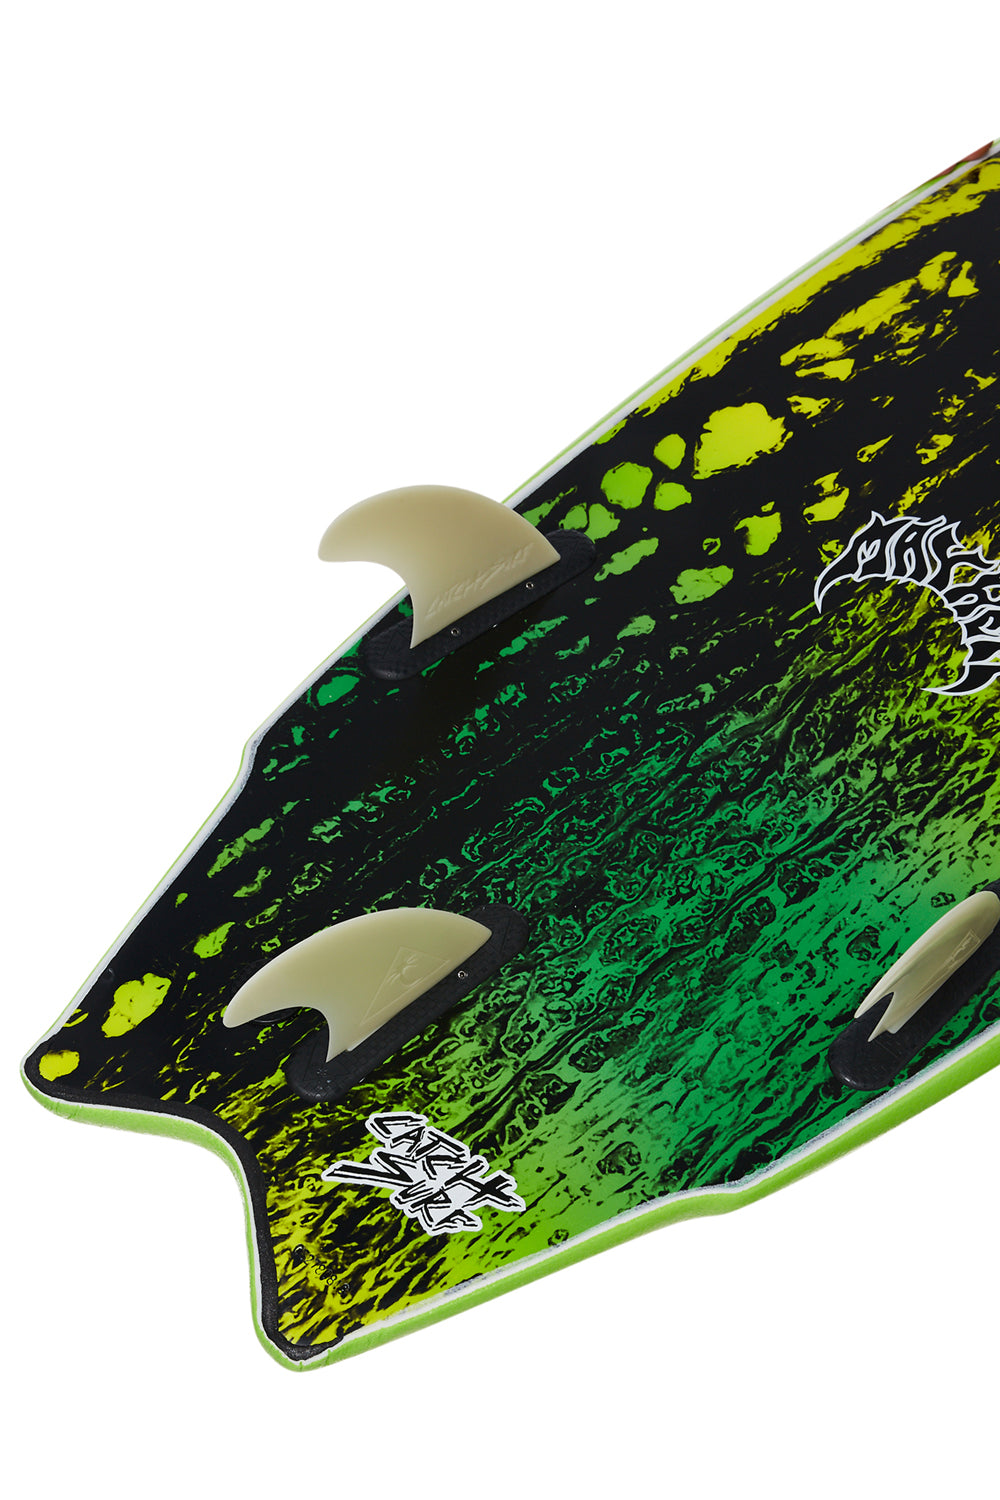 Catch Surf Odysea x Lost Round Nose Fish Softboard